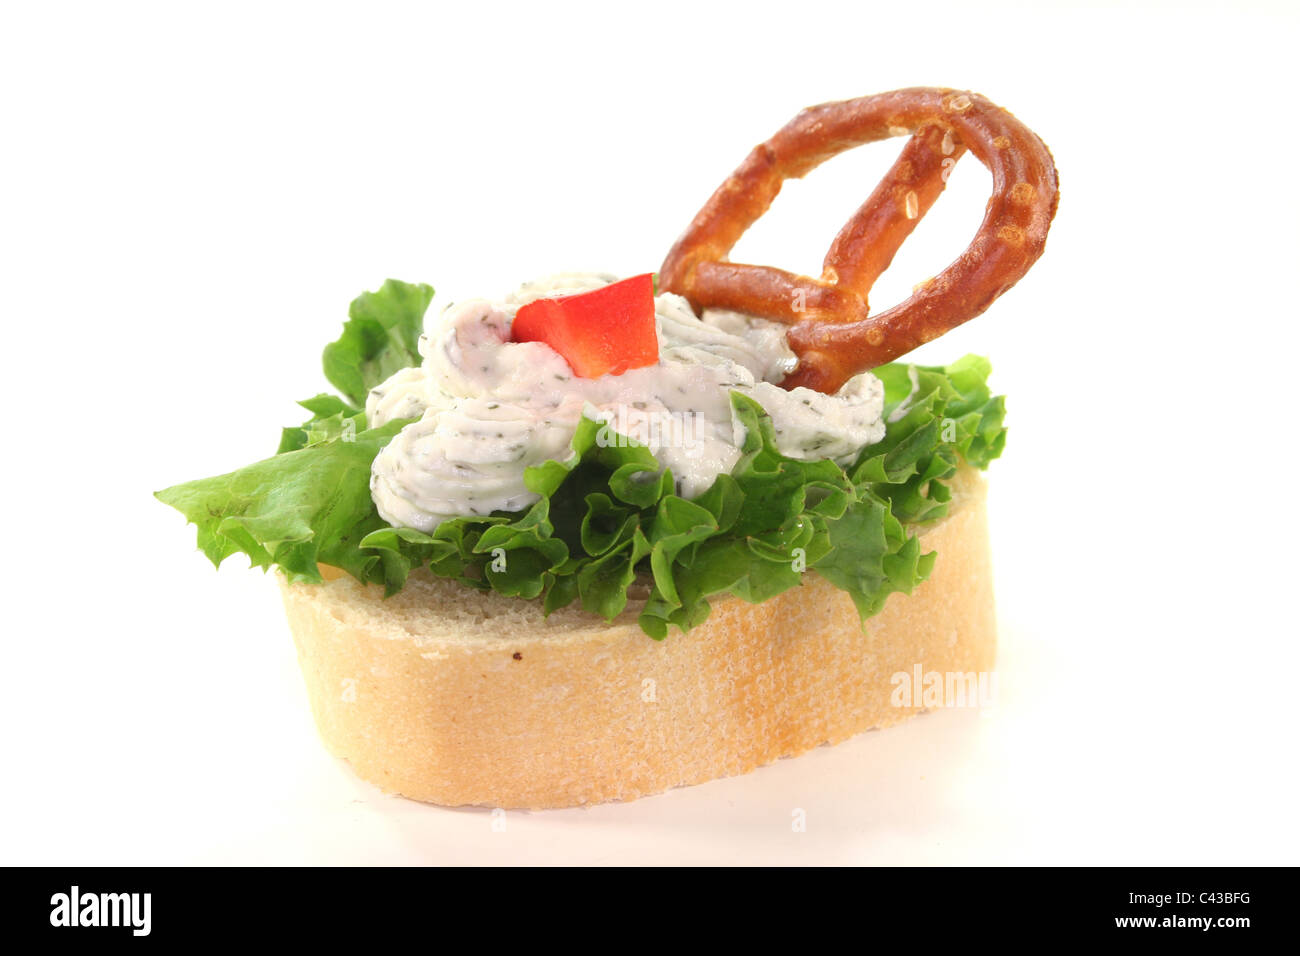 Canape with lettuce, cheese, peppers and a pretzel on a white background Stock Photo